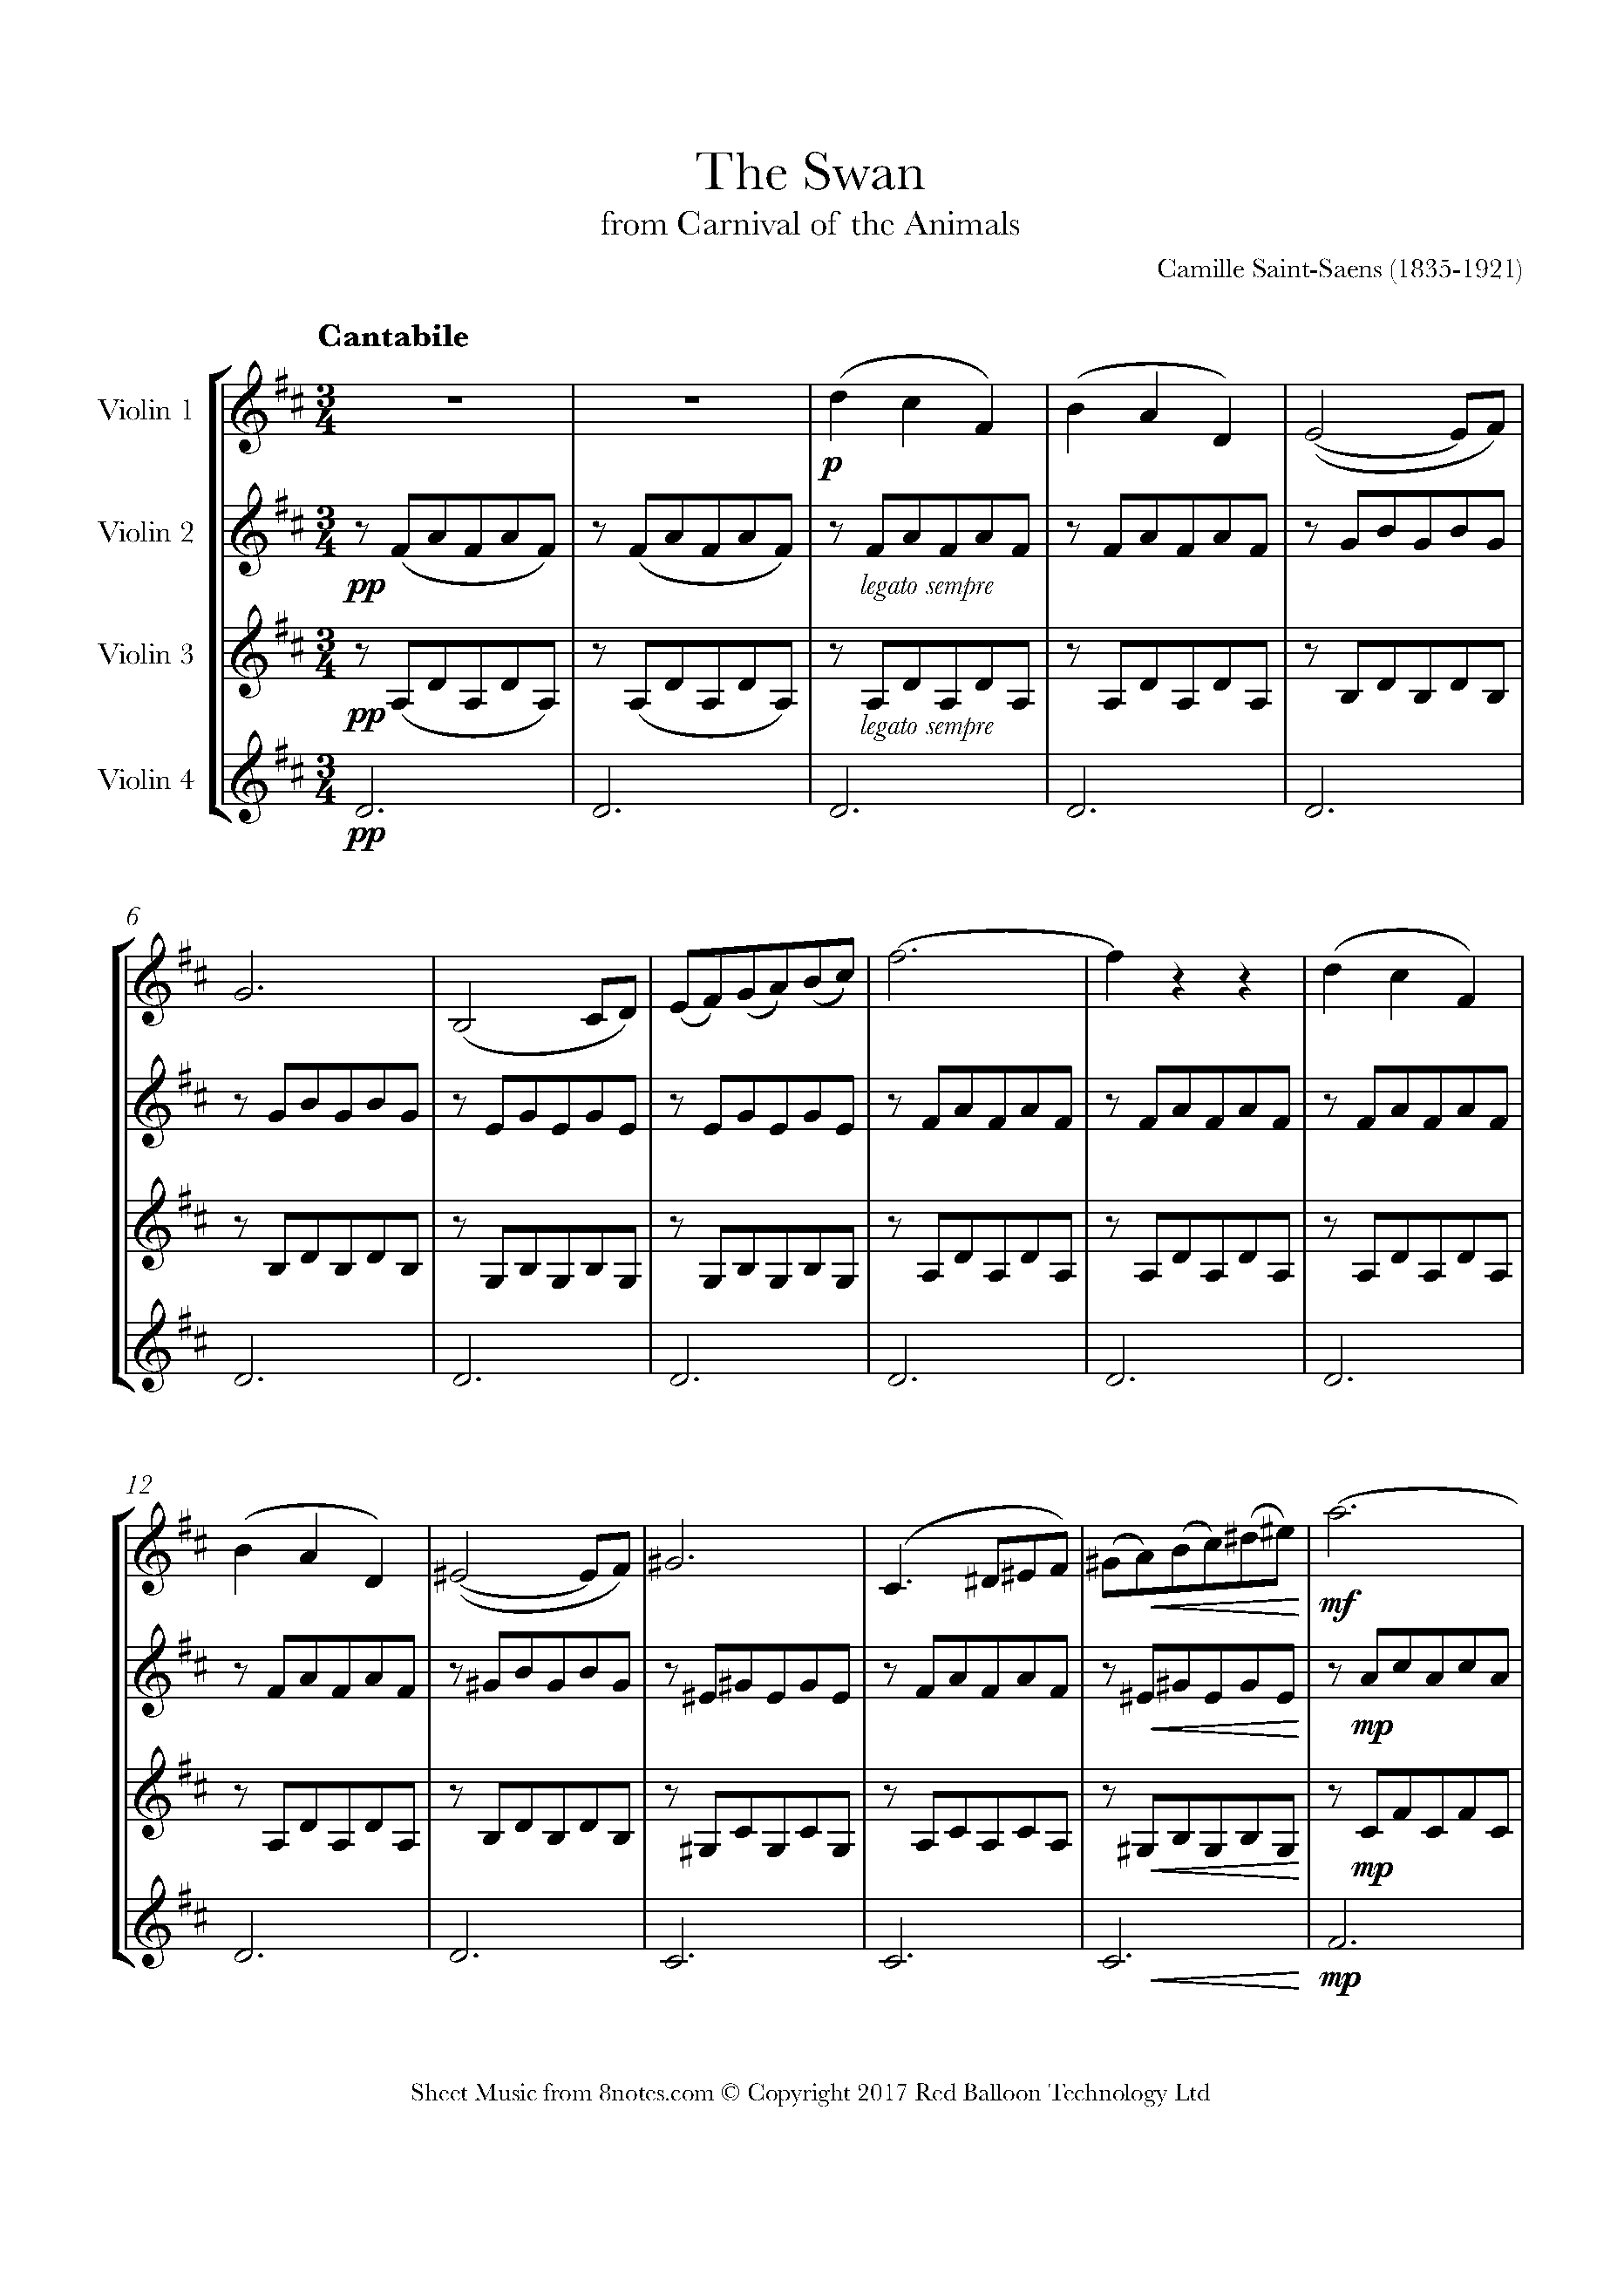 Saint-Saëns - The Swan from Carnival of the Animals Sheet music for Violin  Quartet 